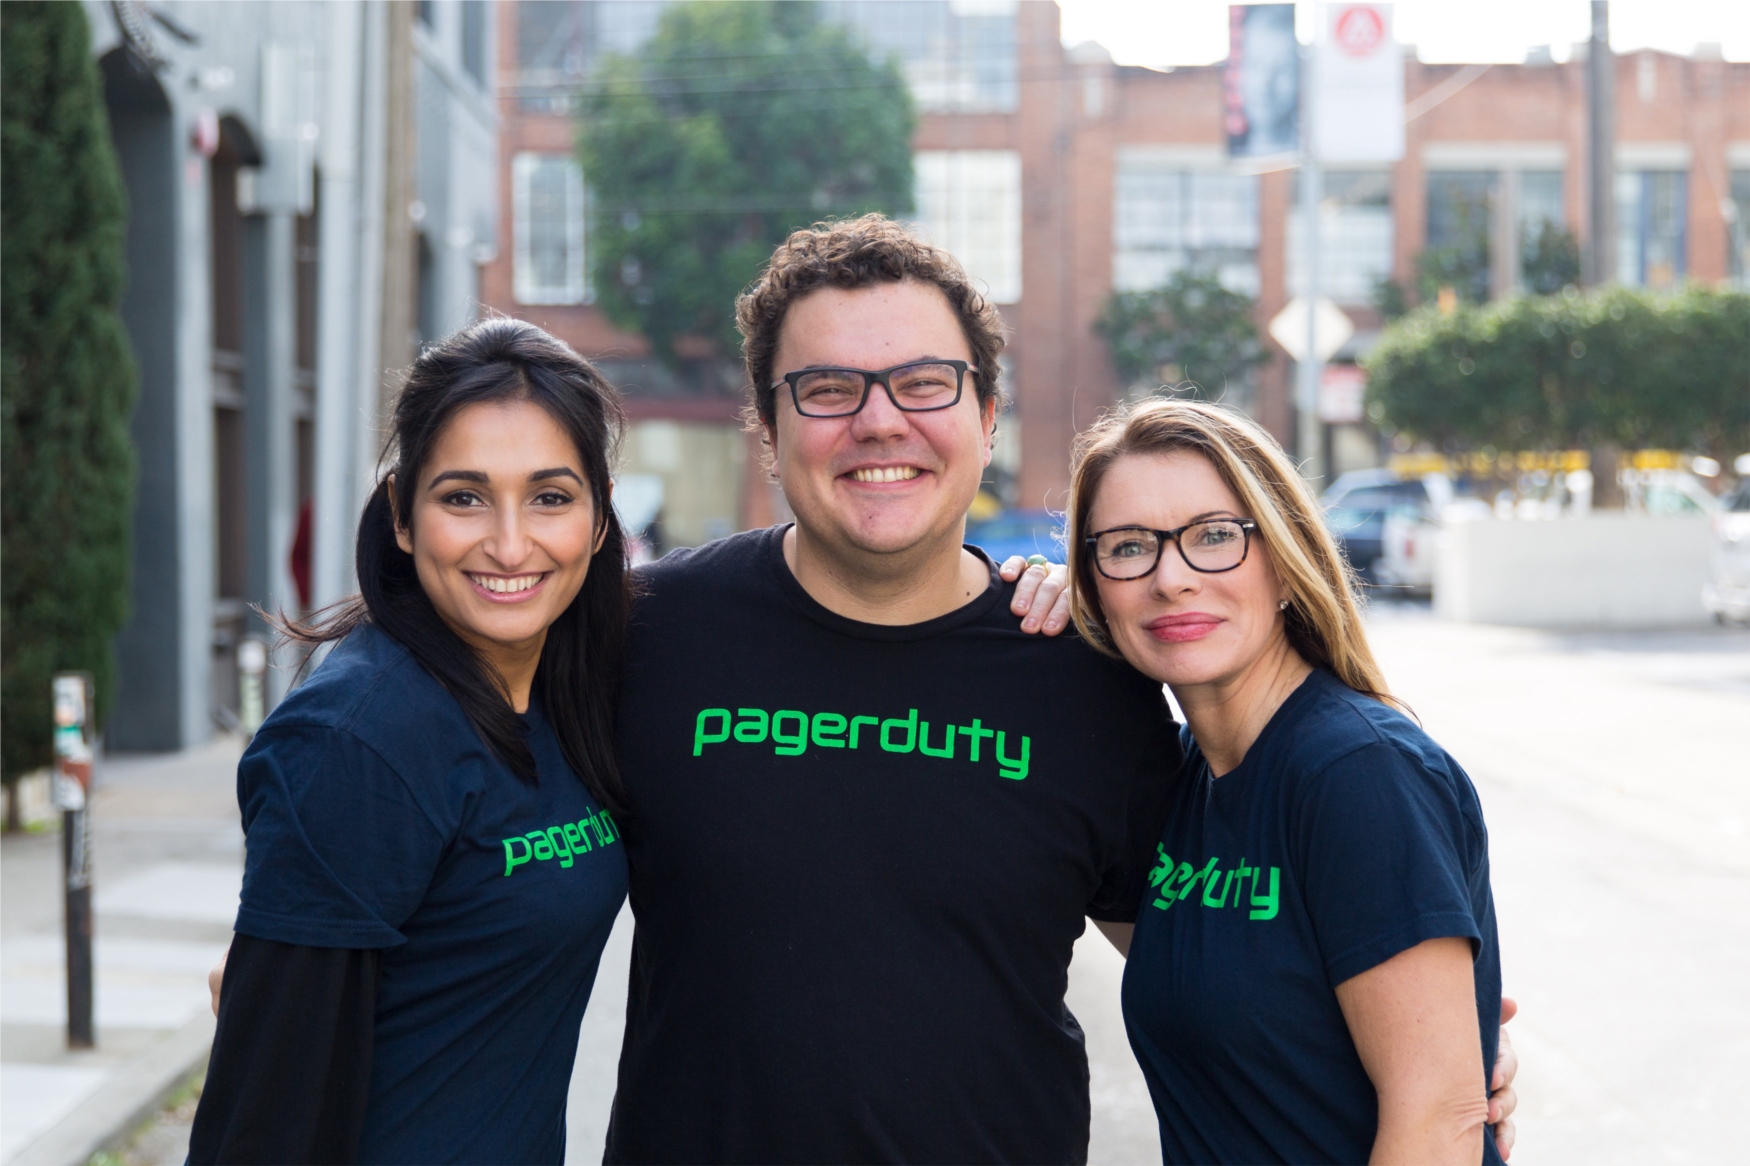 PagerDuty's VP of Marketing, CEO, and Head of Culture